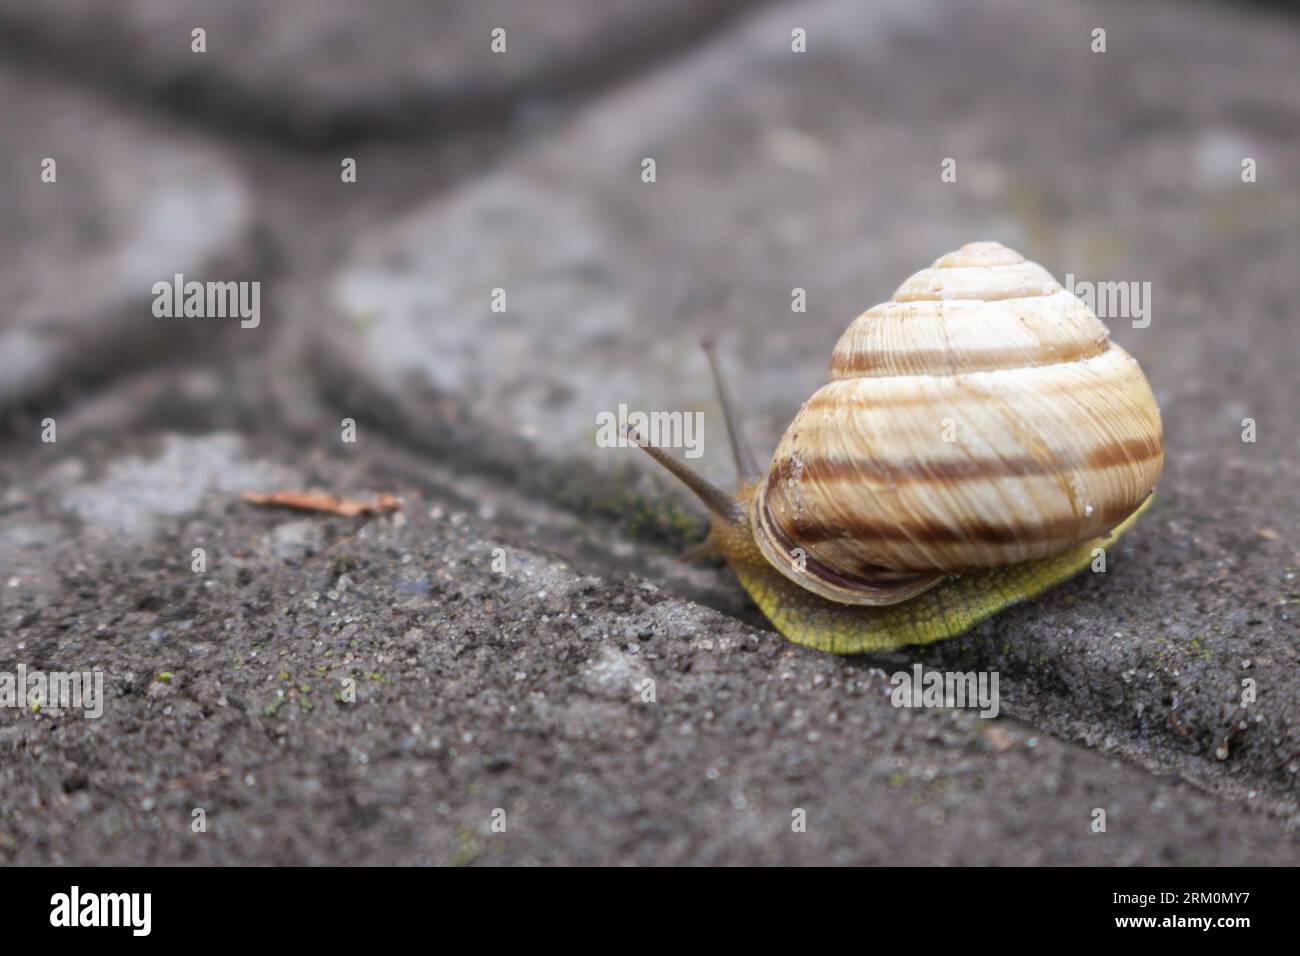 Snail on the road. Slug close up. Grape snail with shell. Nature in details. Brown helix. Slow speed lifestyle. Snail with antenna on asphalt. Stock Photo